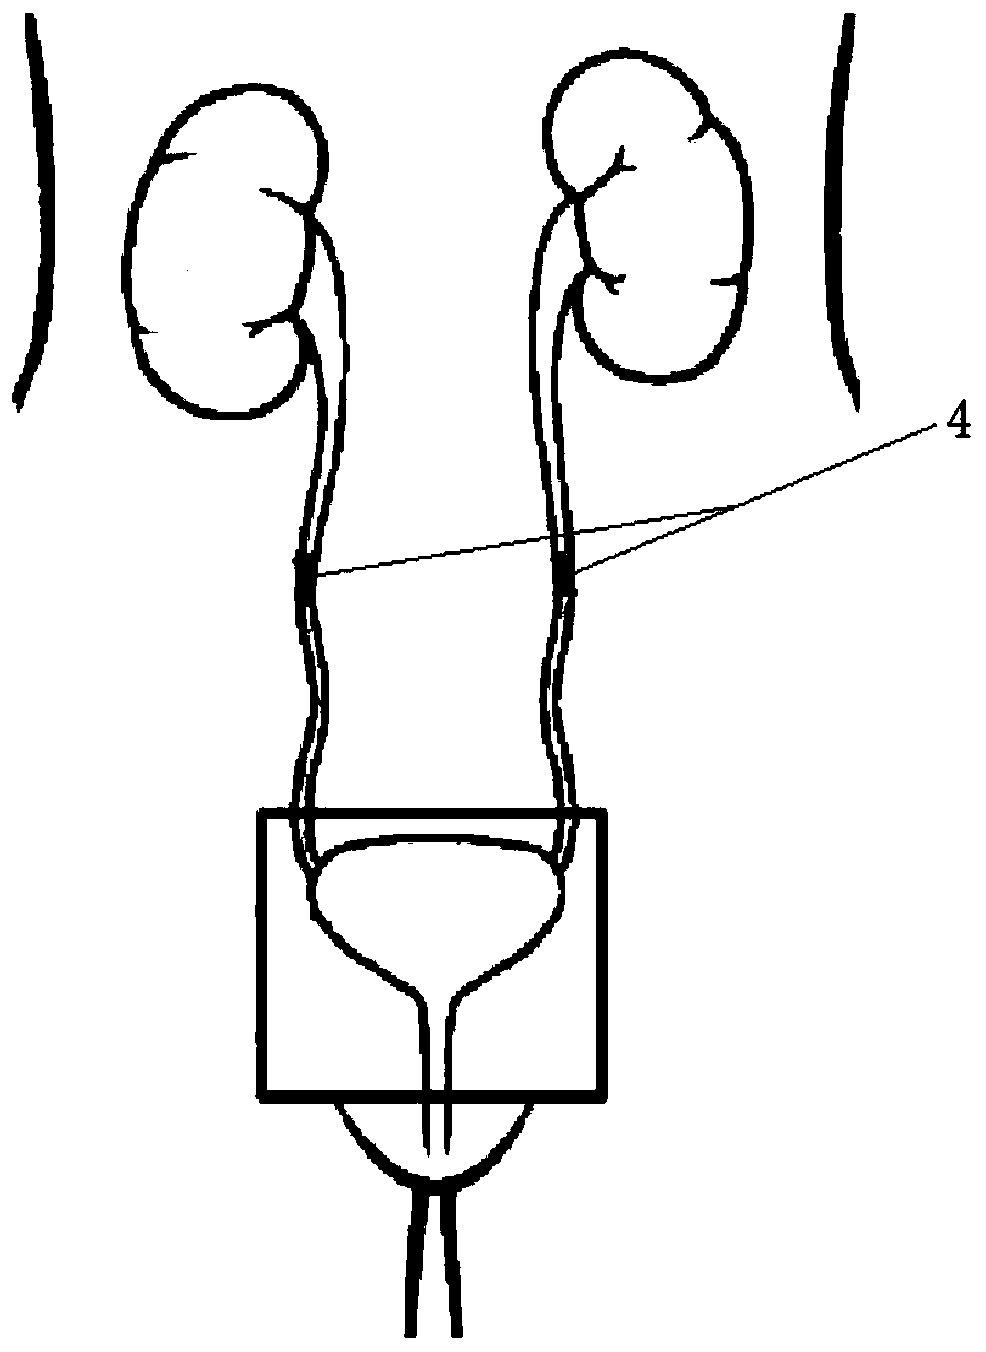 Independent urination assistant device and method